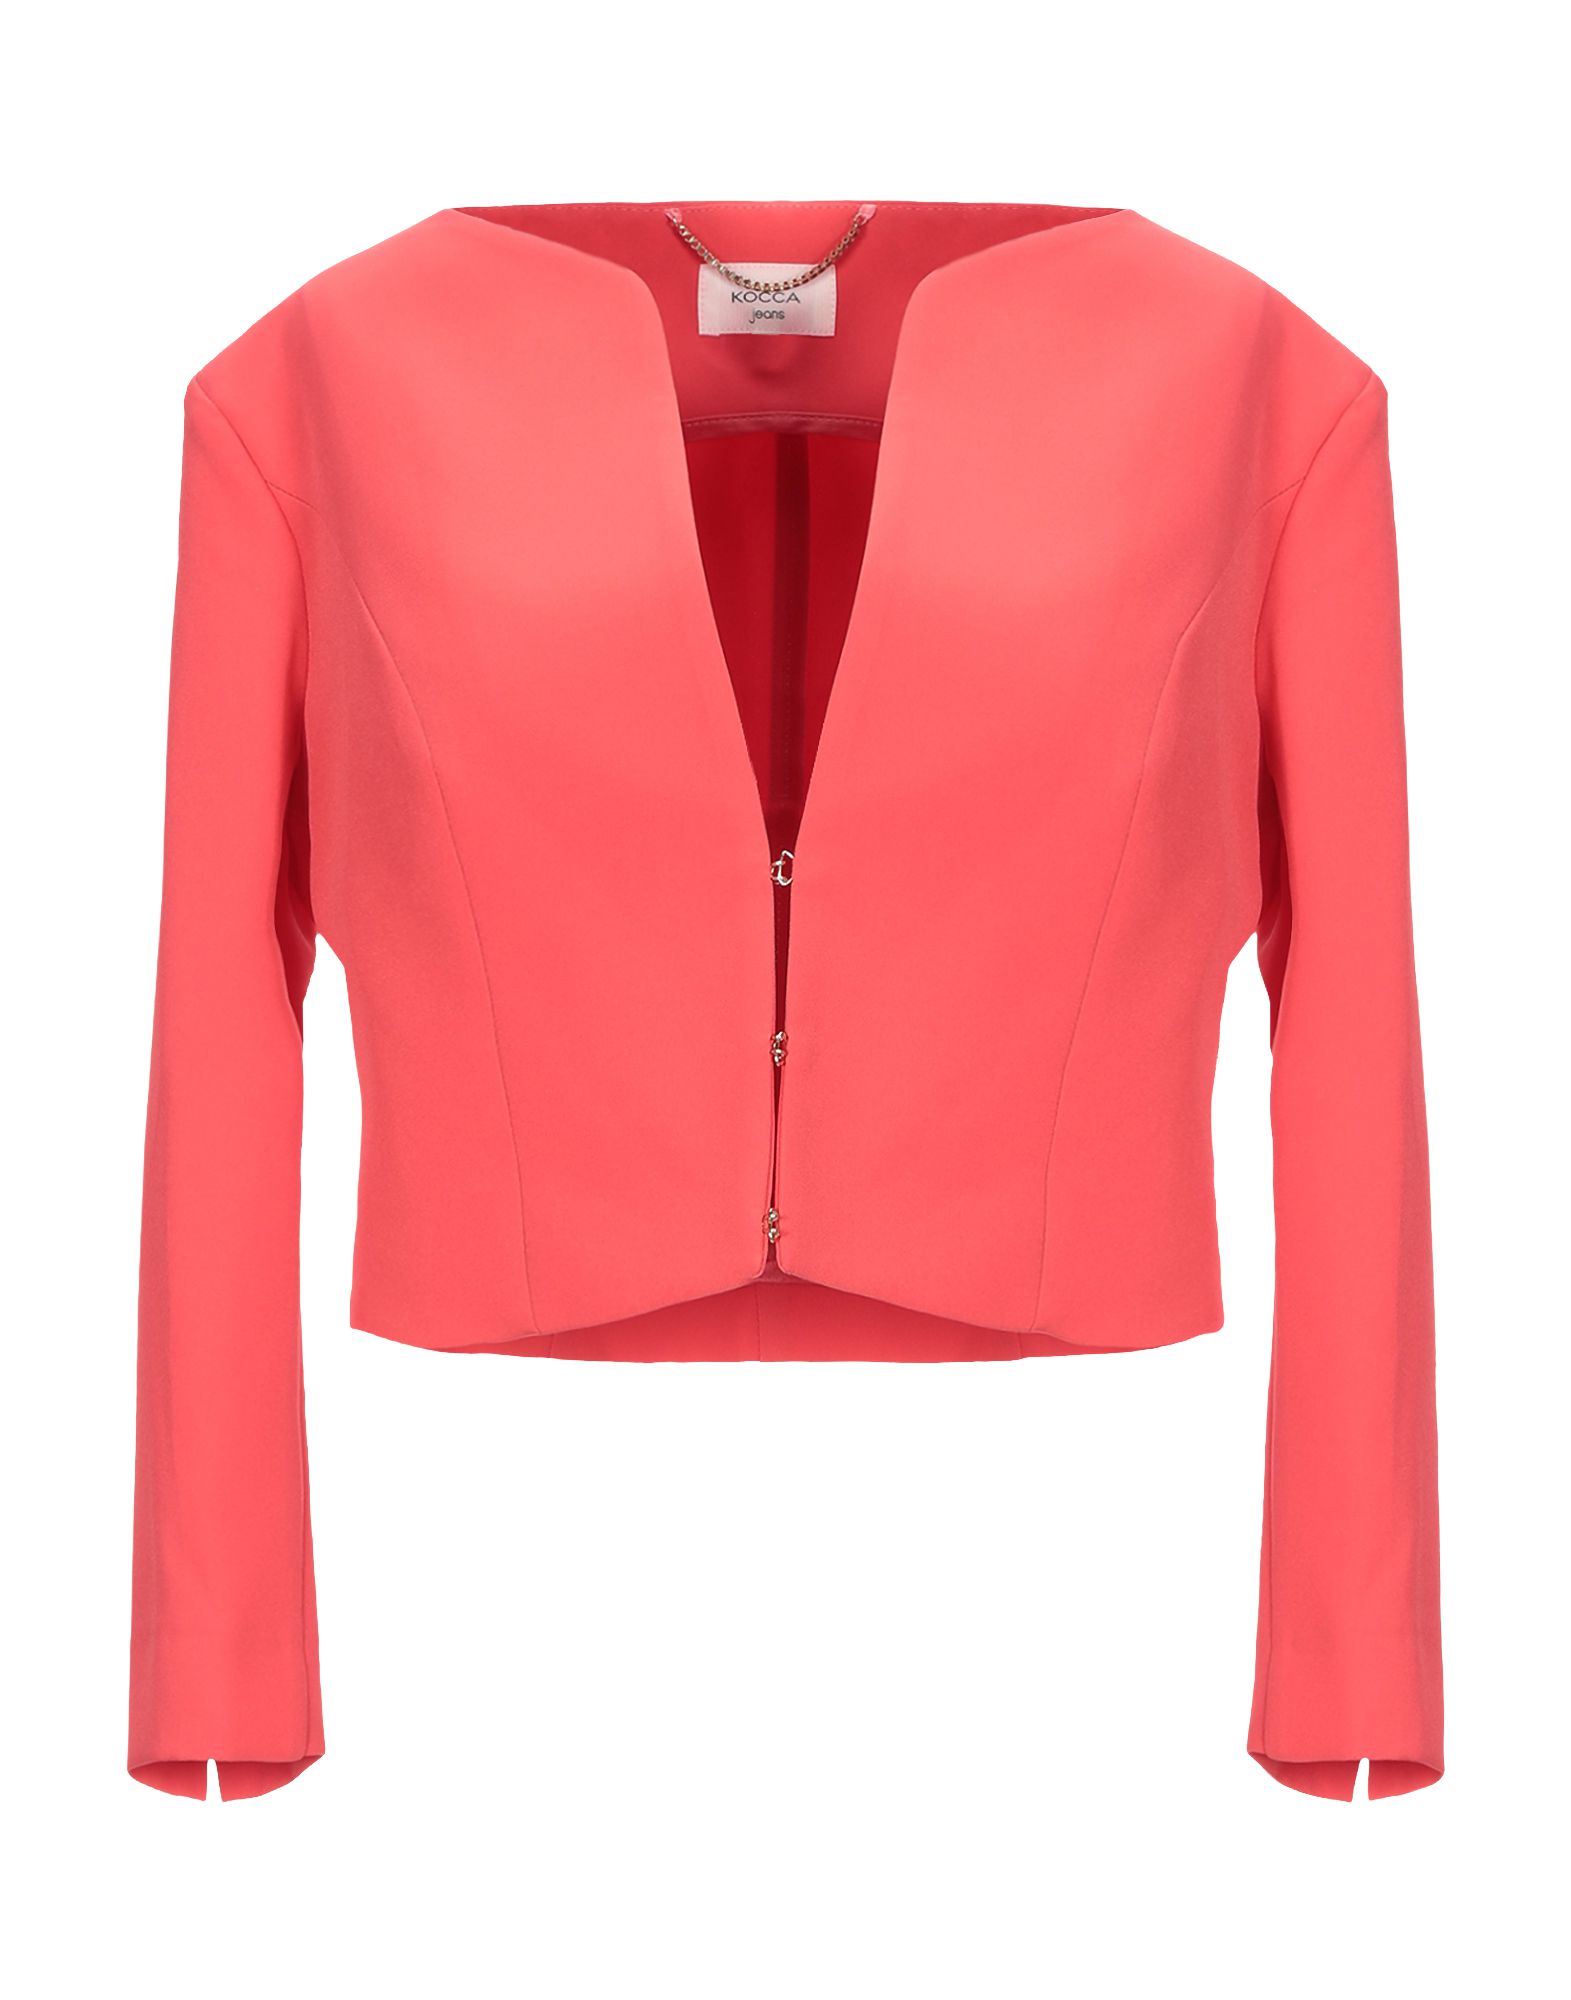 Kocca Suit Jackets In Red